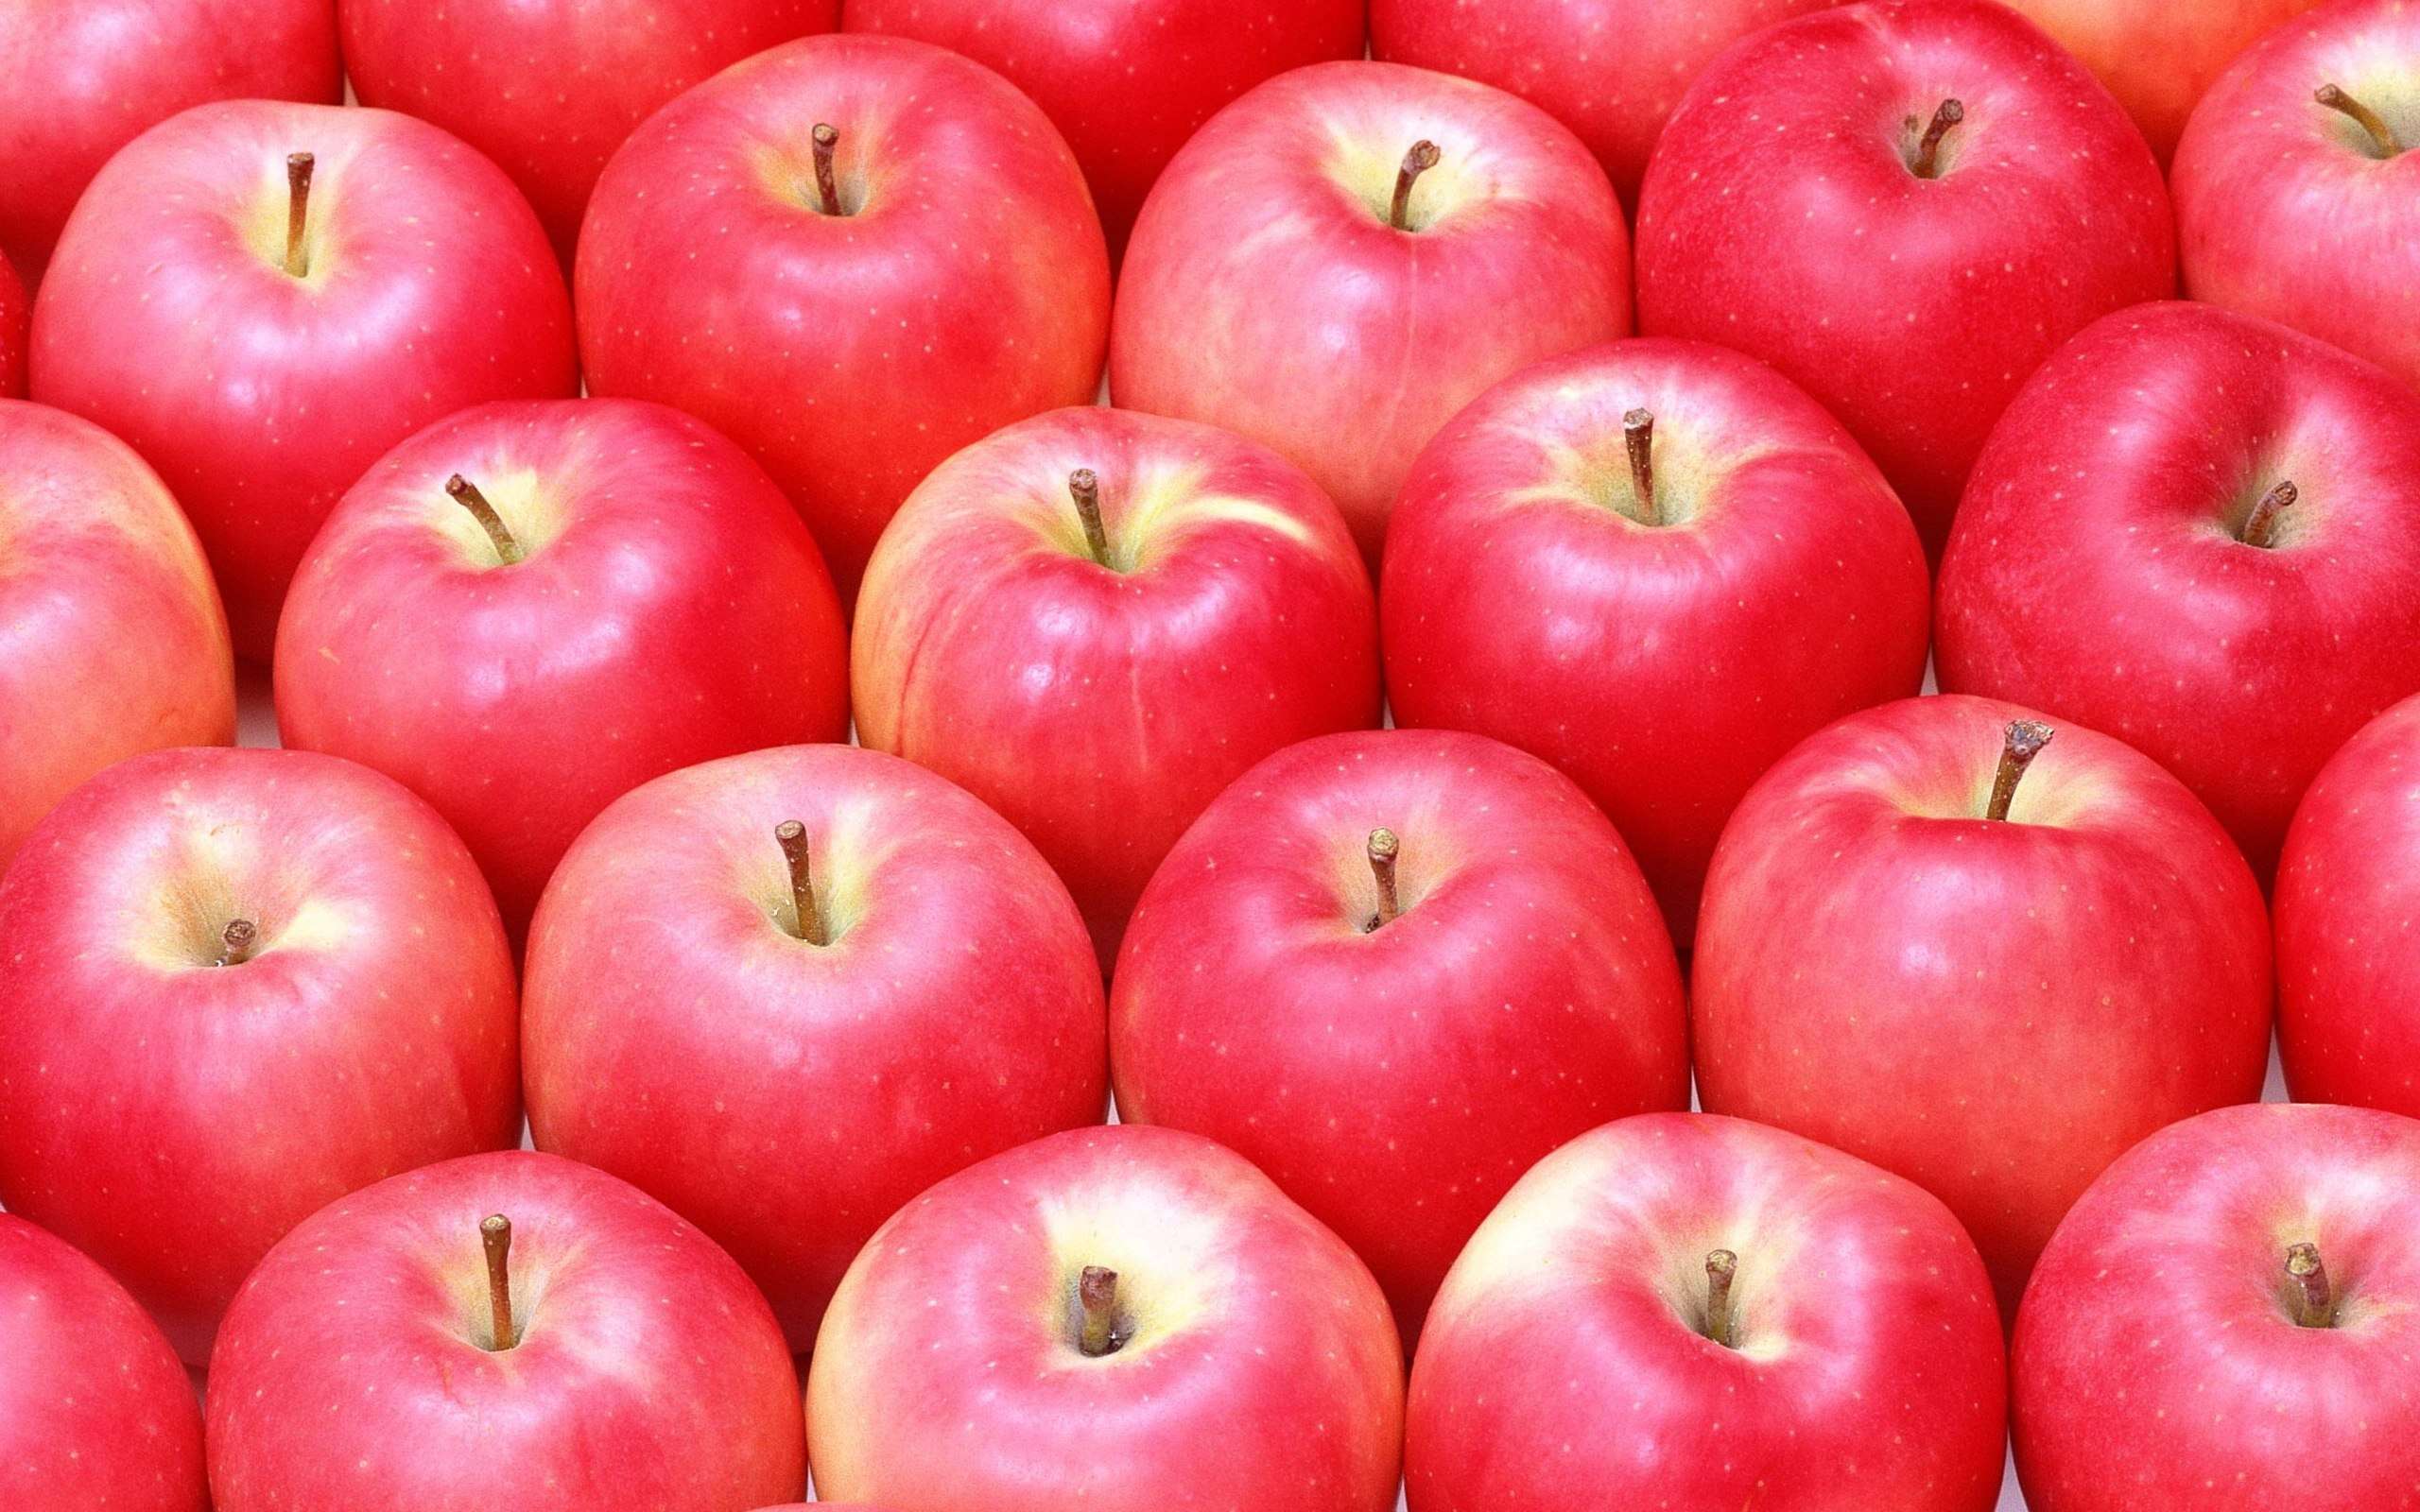 Download Apples Wallpaper 411 2560x1600 px High Resolution